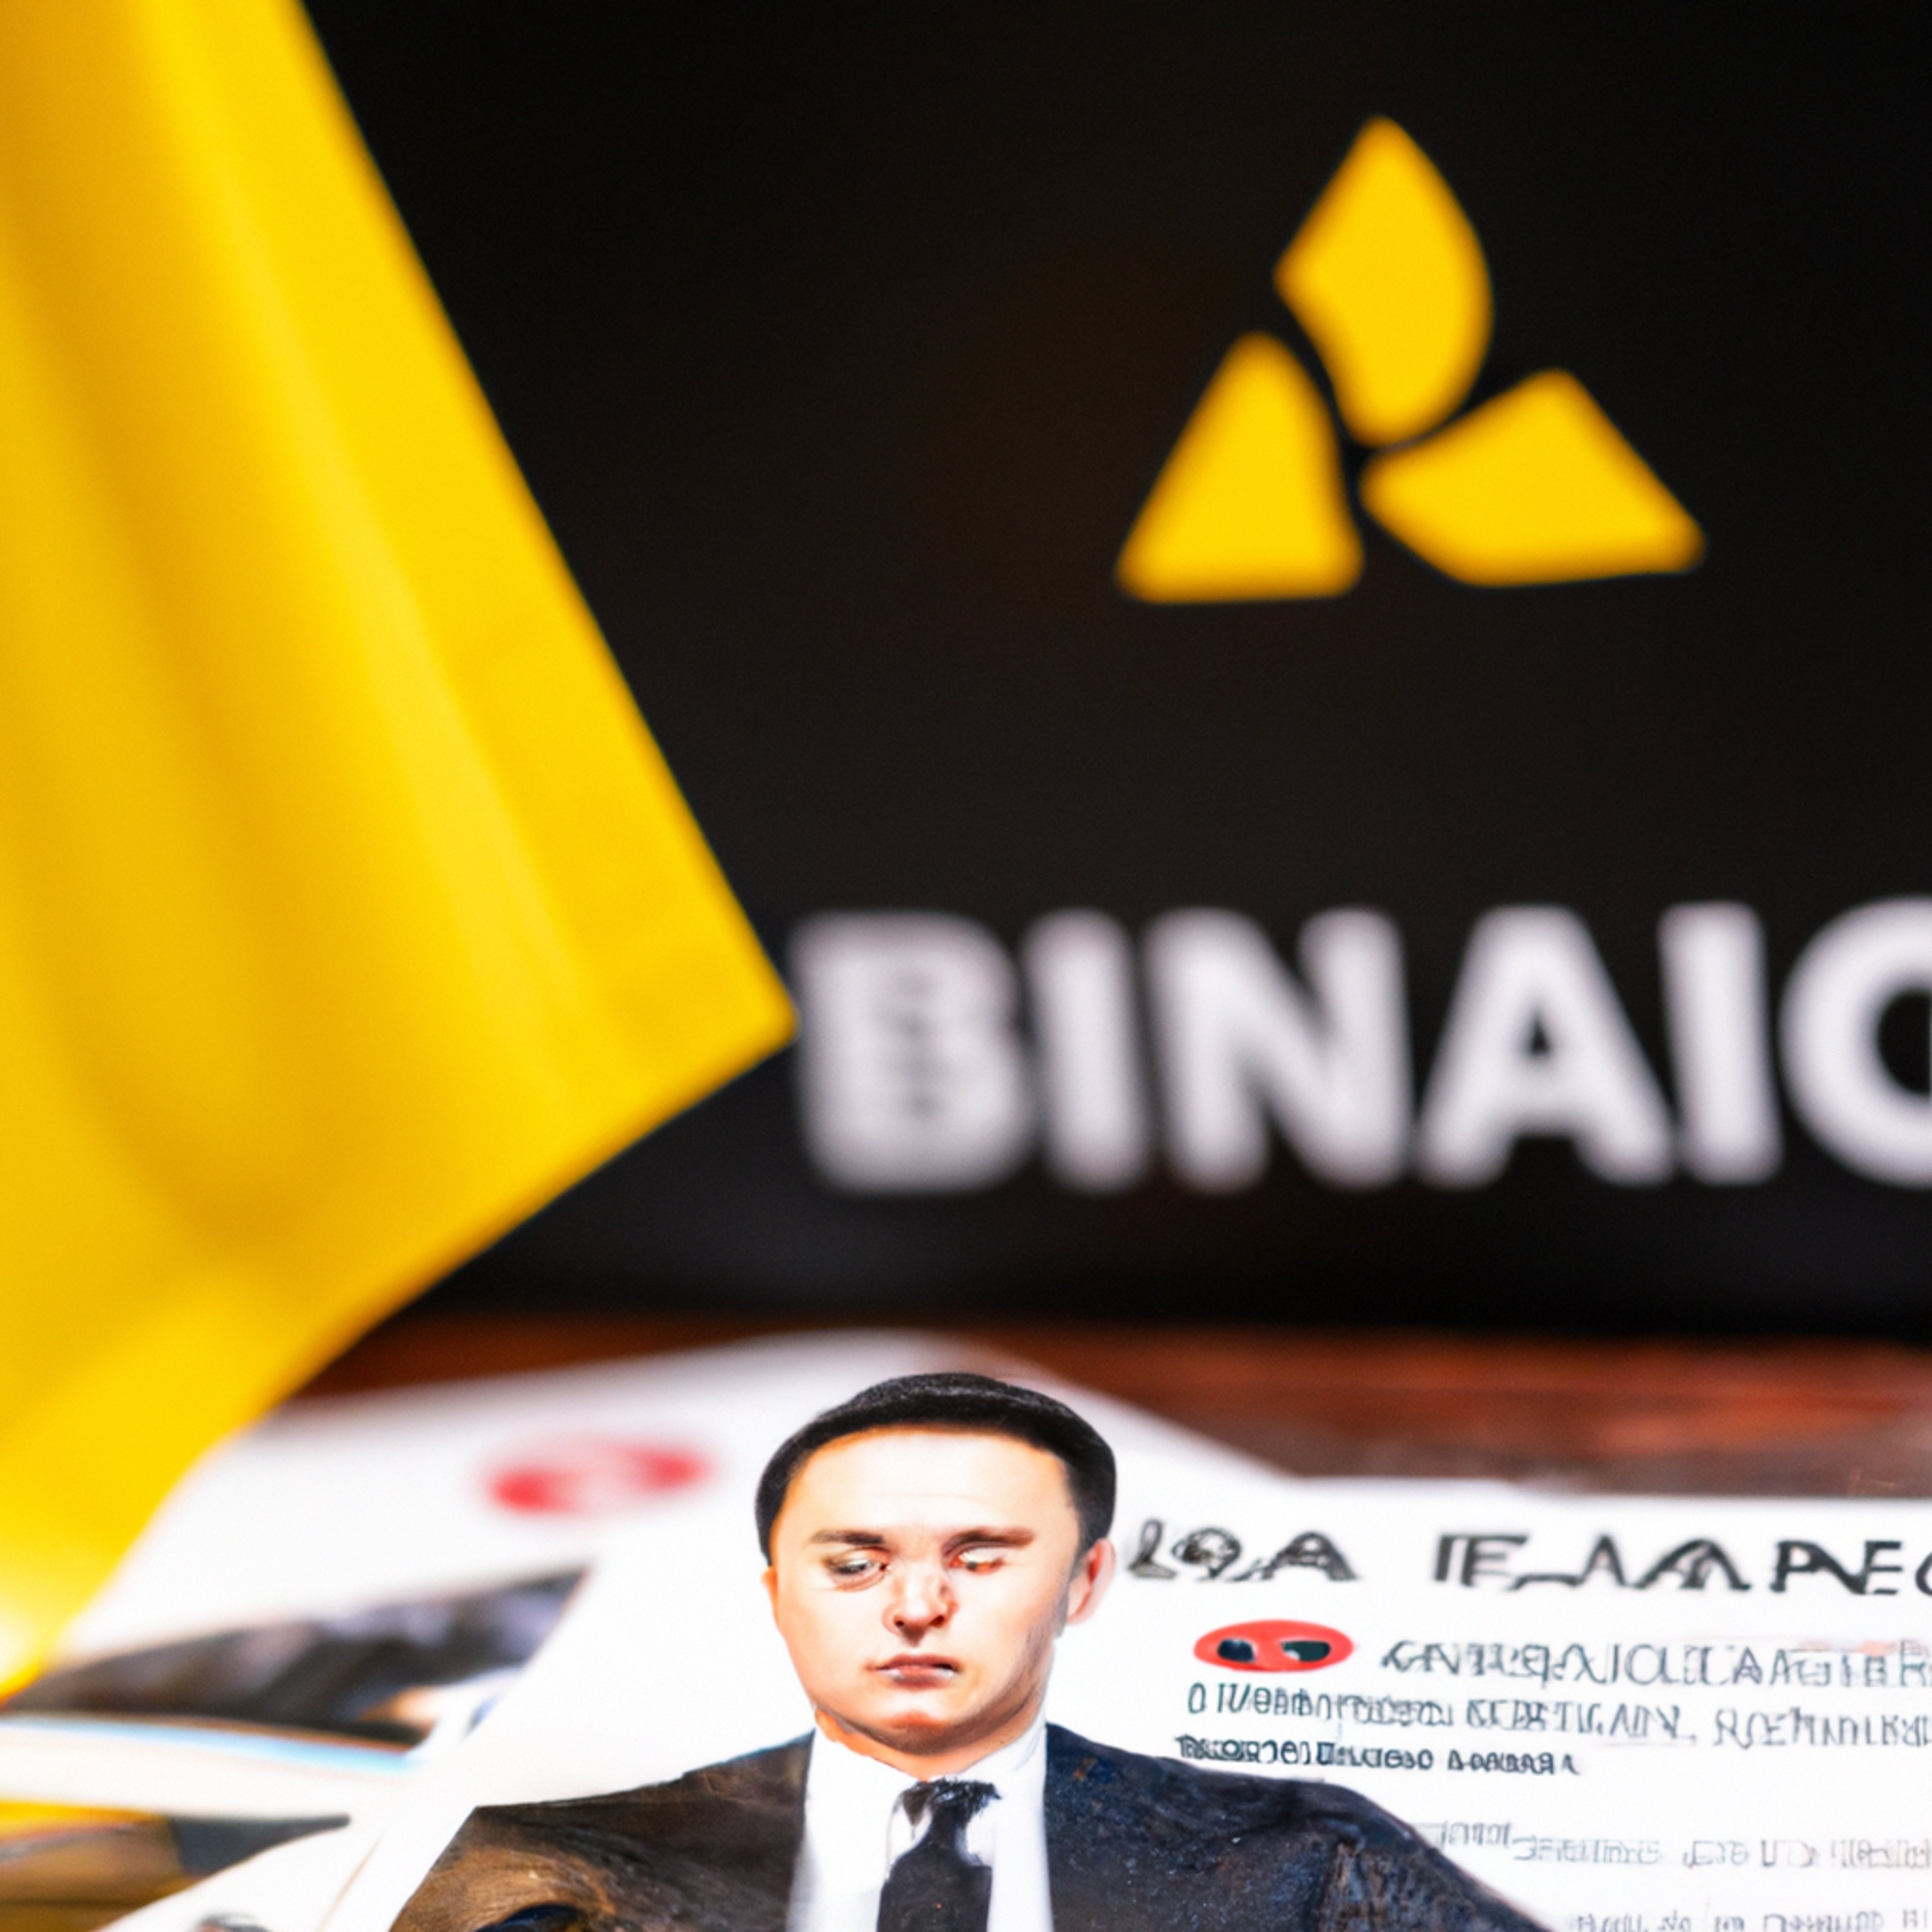 Binance Denies Ties to China, Accuses Financial Times of Mischaracterizing Events